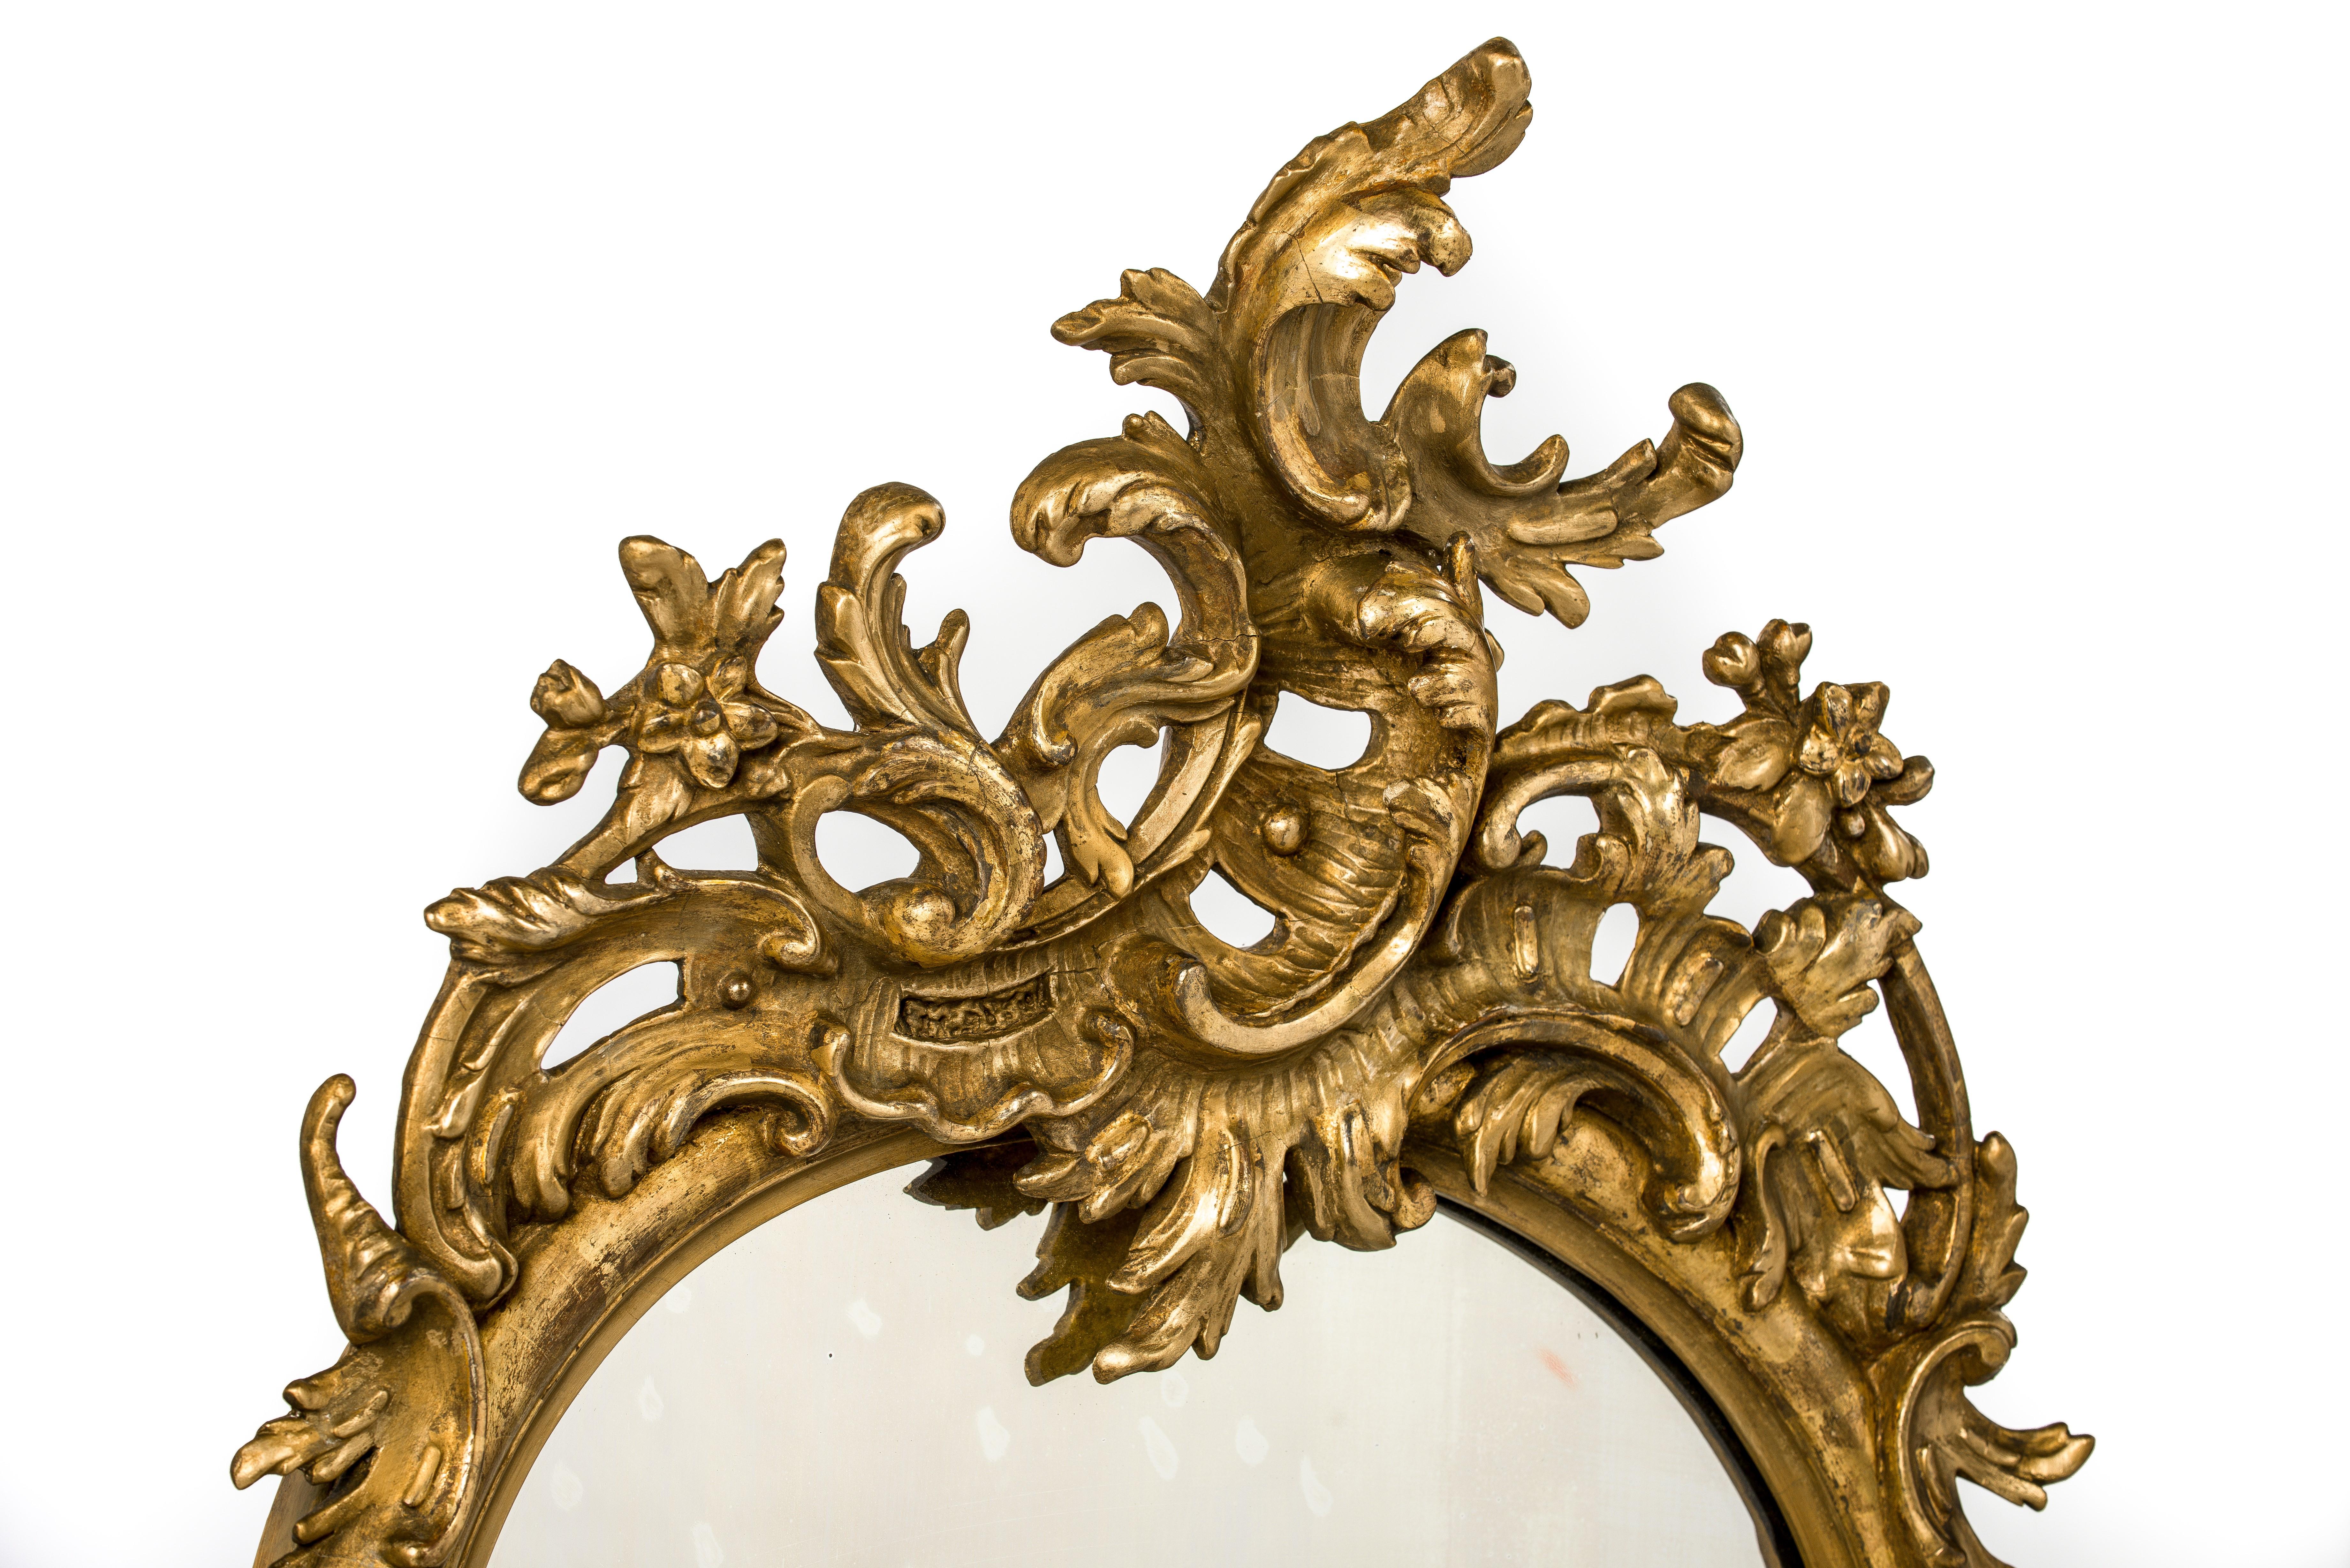 This beautiful abundant ornamented French mirror was made in the late 19th century. Its serpentine shape was made in solid pine smoothened with gesso. The frame is completely decorated with classic French ornaments such as C scrolls, flowers,